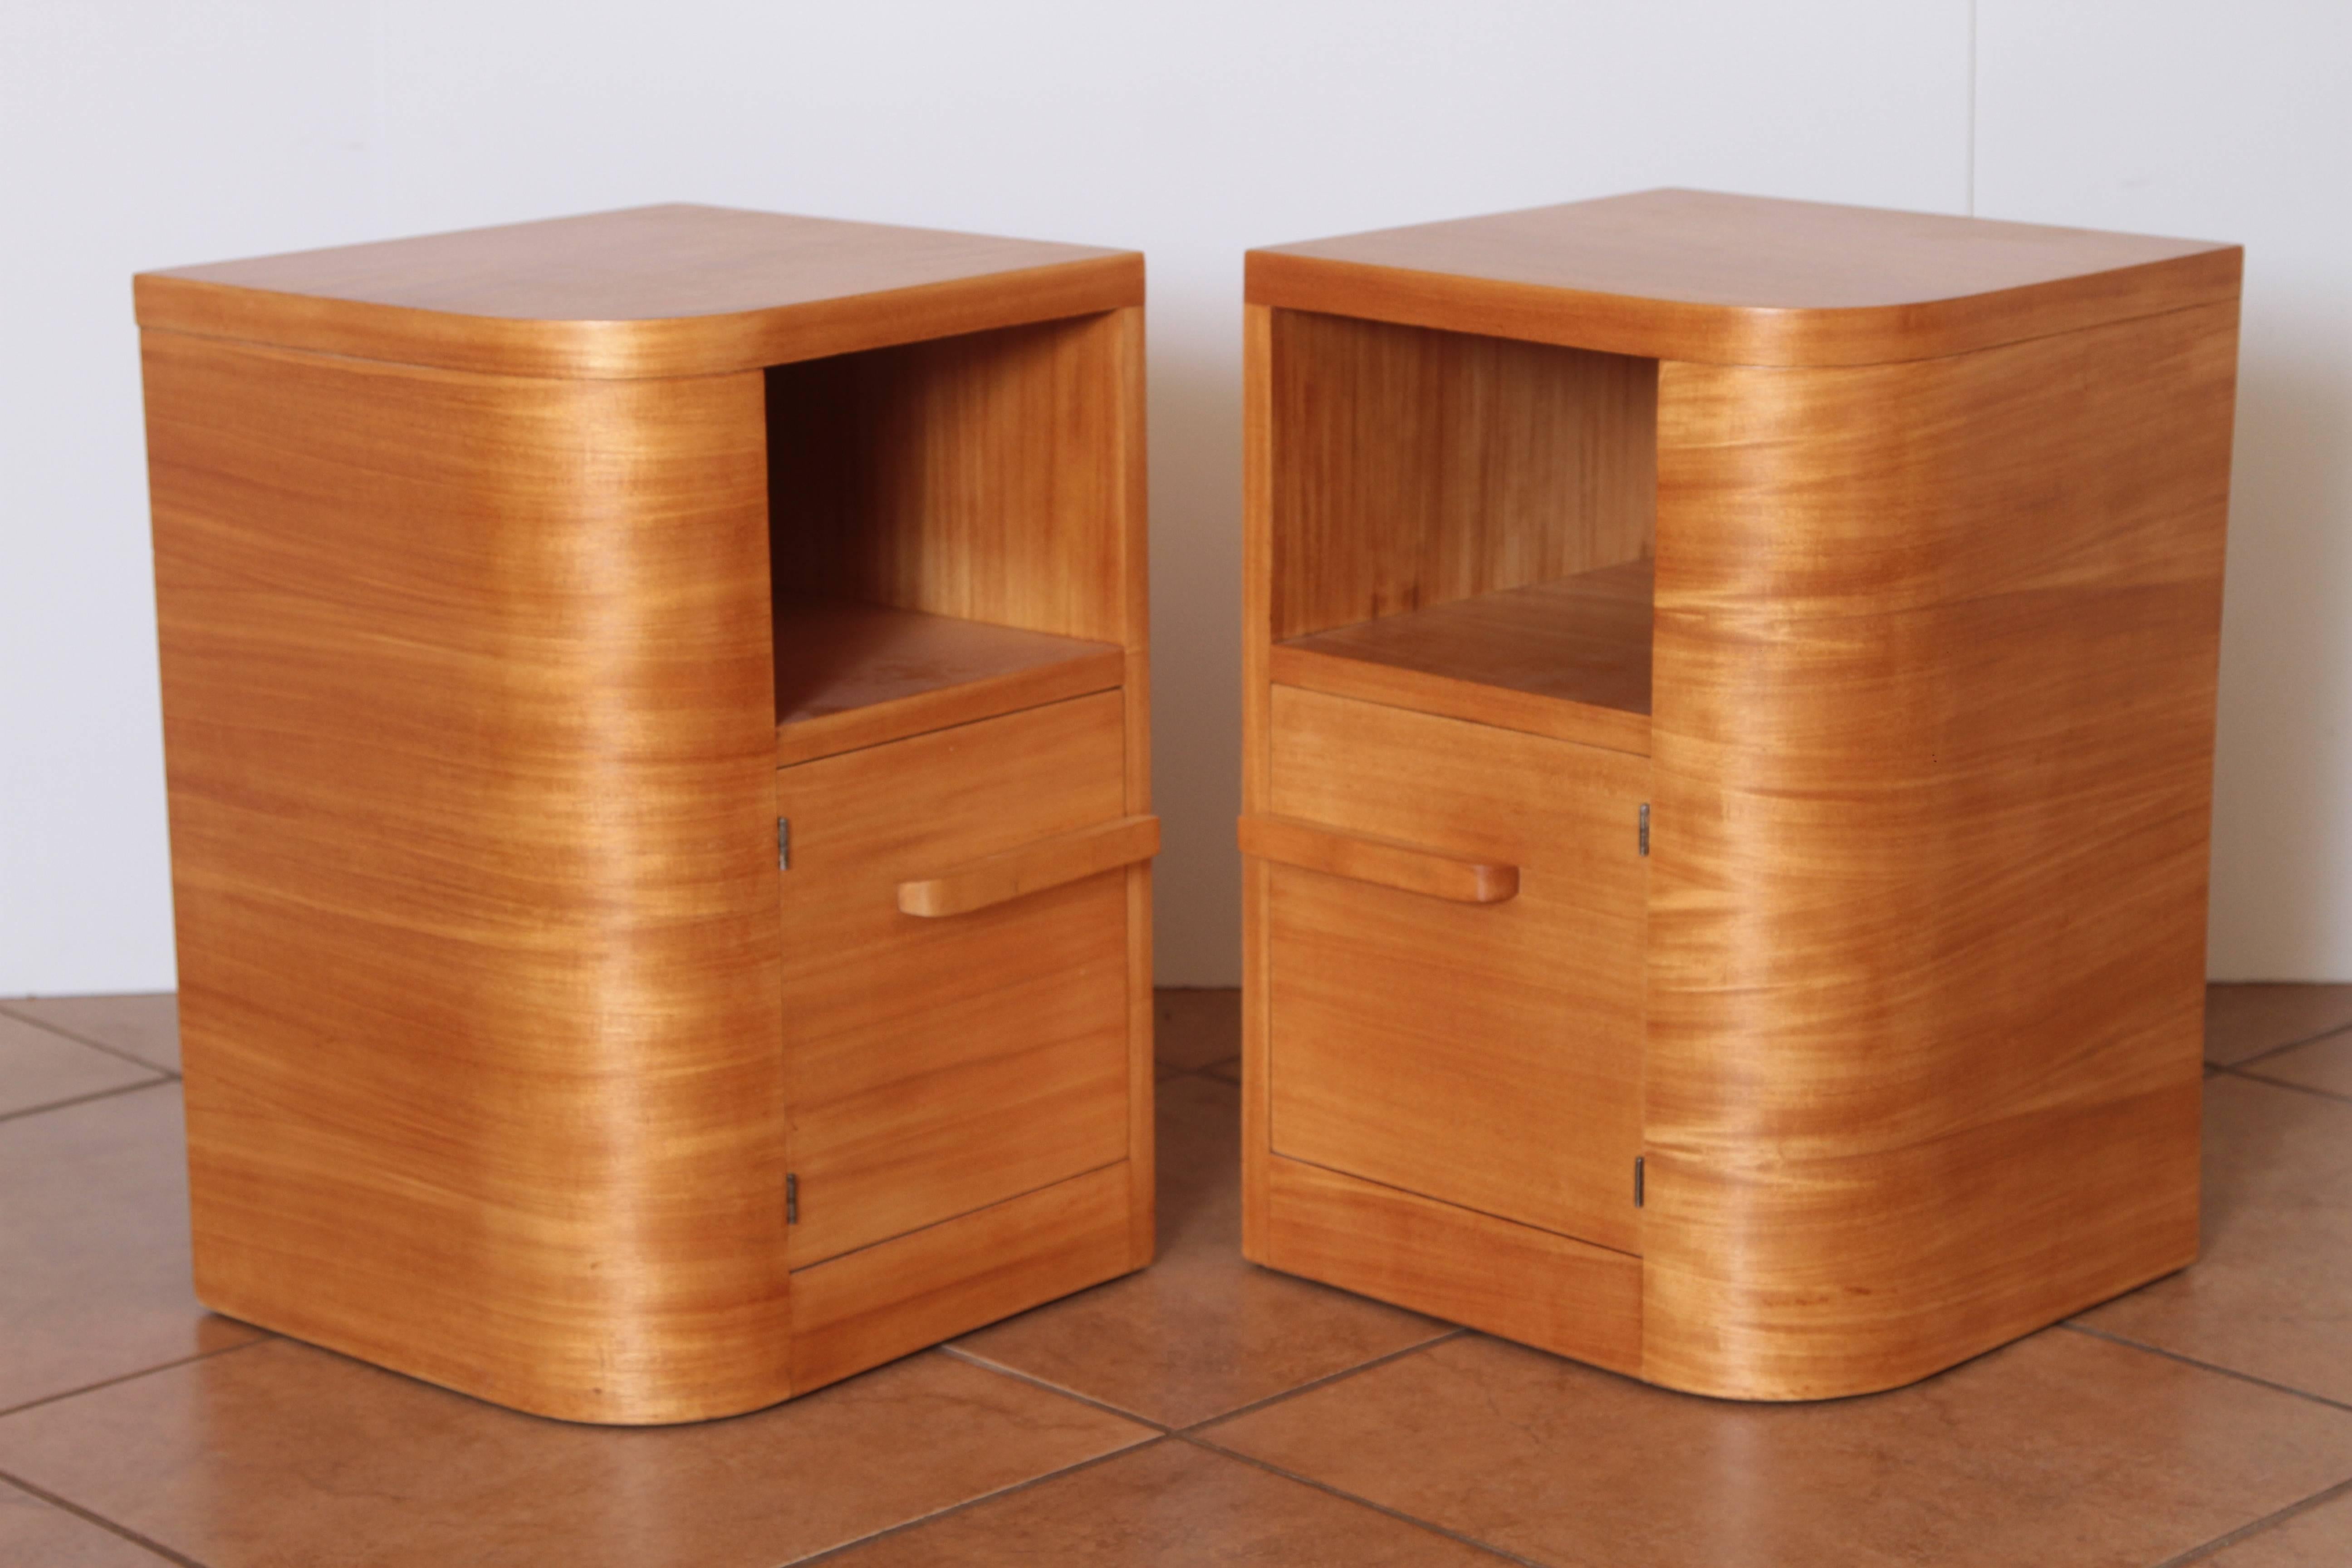 American Art Deco Modern Age Nightstands / End Tables, Manner of Donald Deskey, Pair